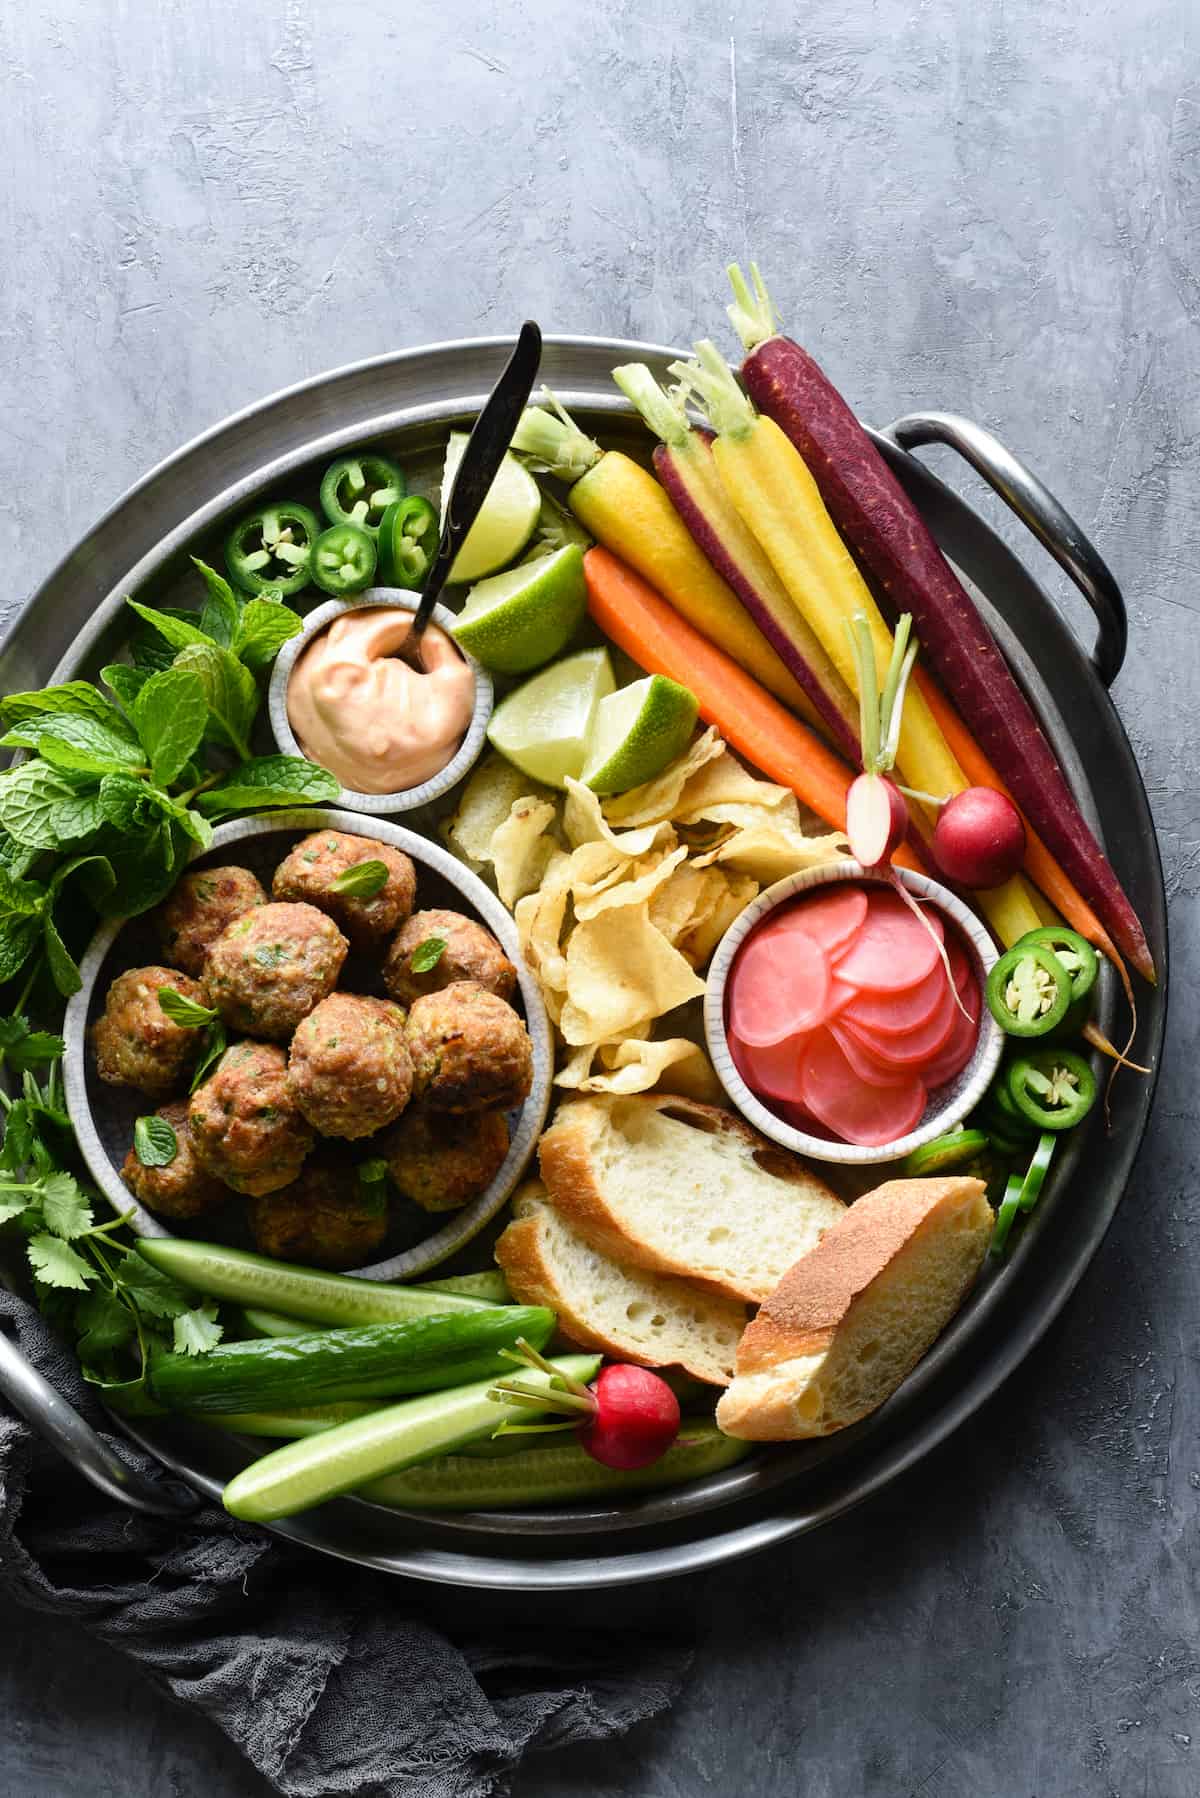 This Banh Mi Meatball Snack Dinner is a healthful platter of fresh ingredients that the whole family will love. Turkey meatballs, fresh and pickled veggies, bread, potato chips and dipping sauce - it's a fun meal that comes together easily. | foxeslovelemons.com